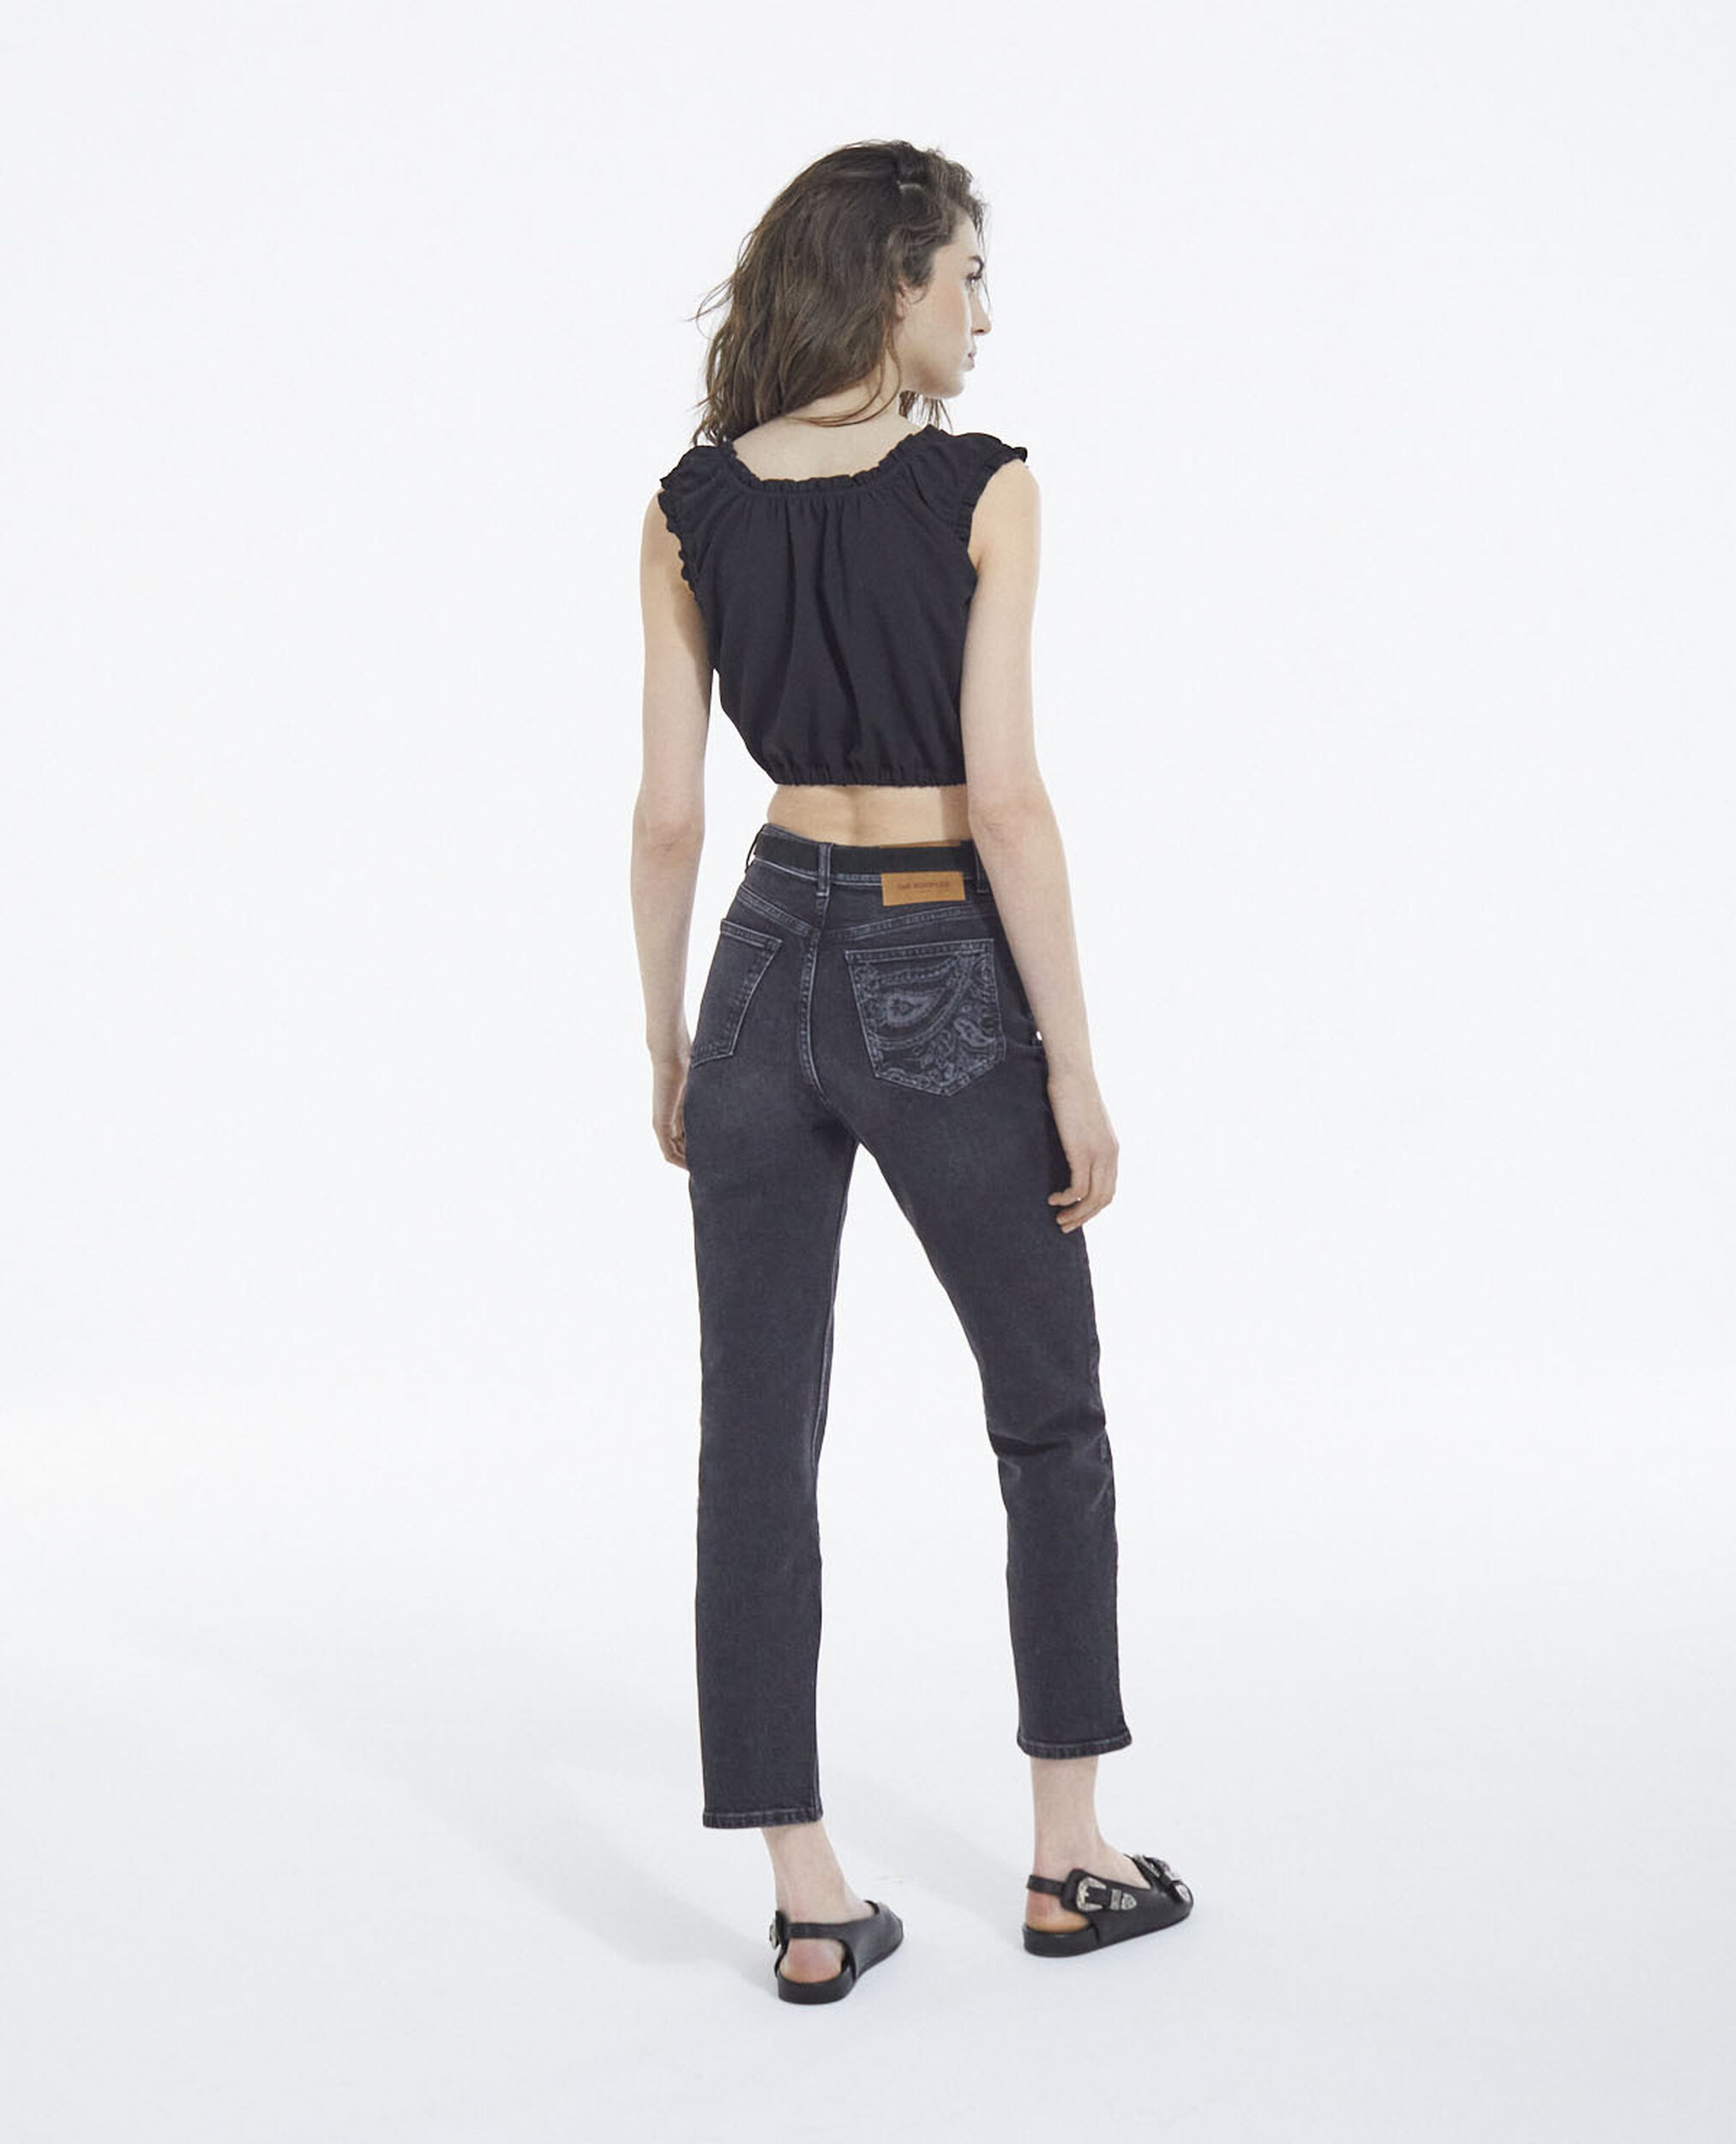 Black crepe top with short puffed sleeves, BLACK, hi-res image number null